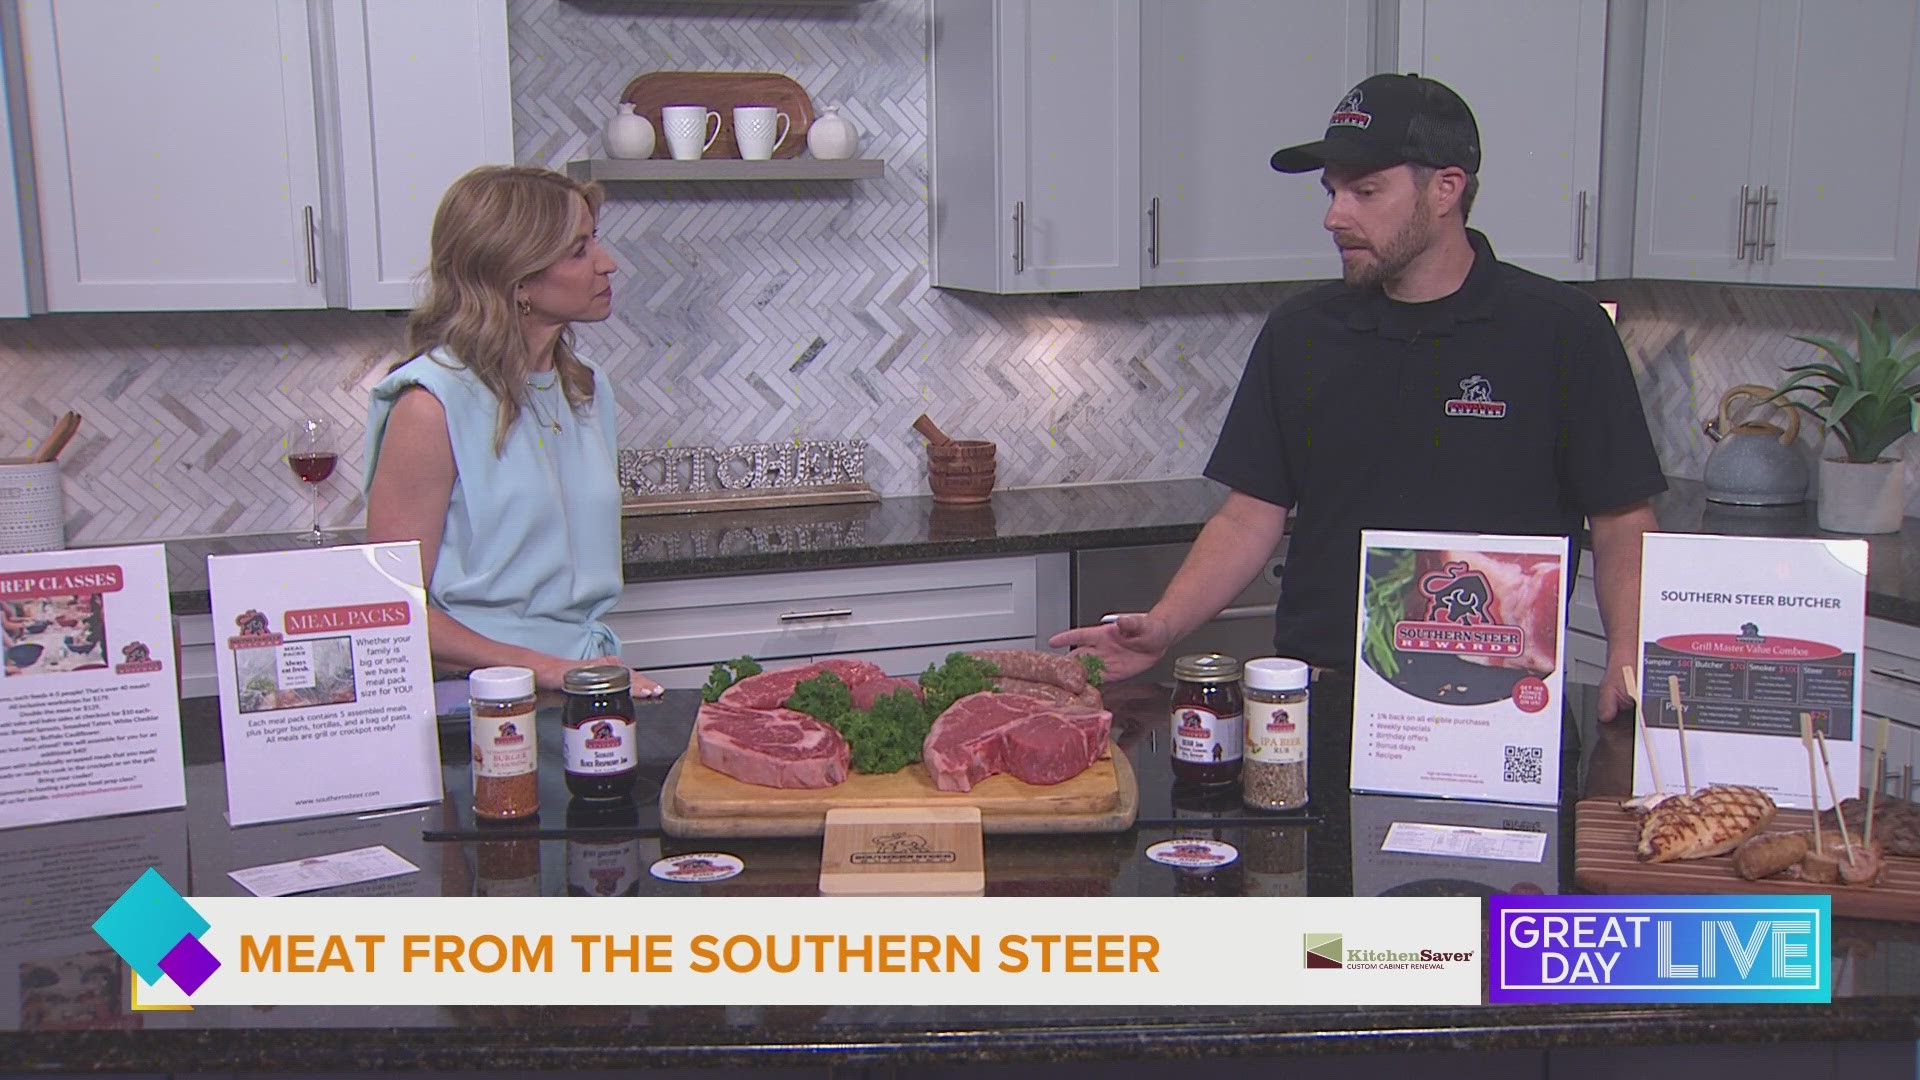 Come check out the new Southern Steer Butcher in St. Petersburg. Everything from meat to sides to catering; they do it all!